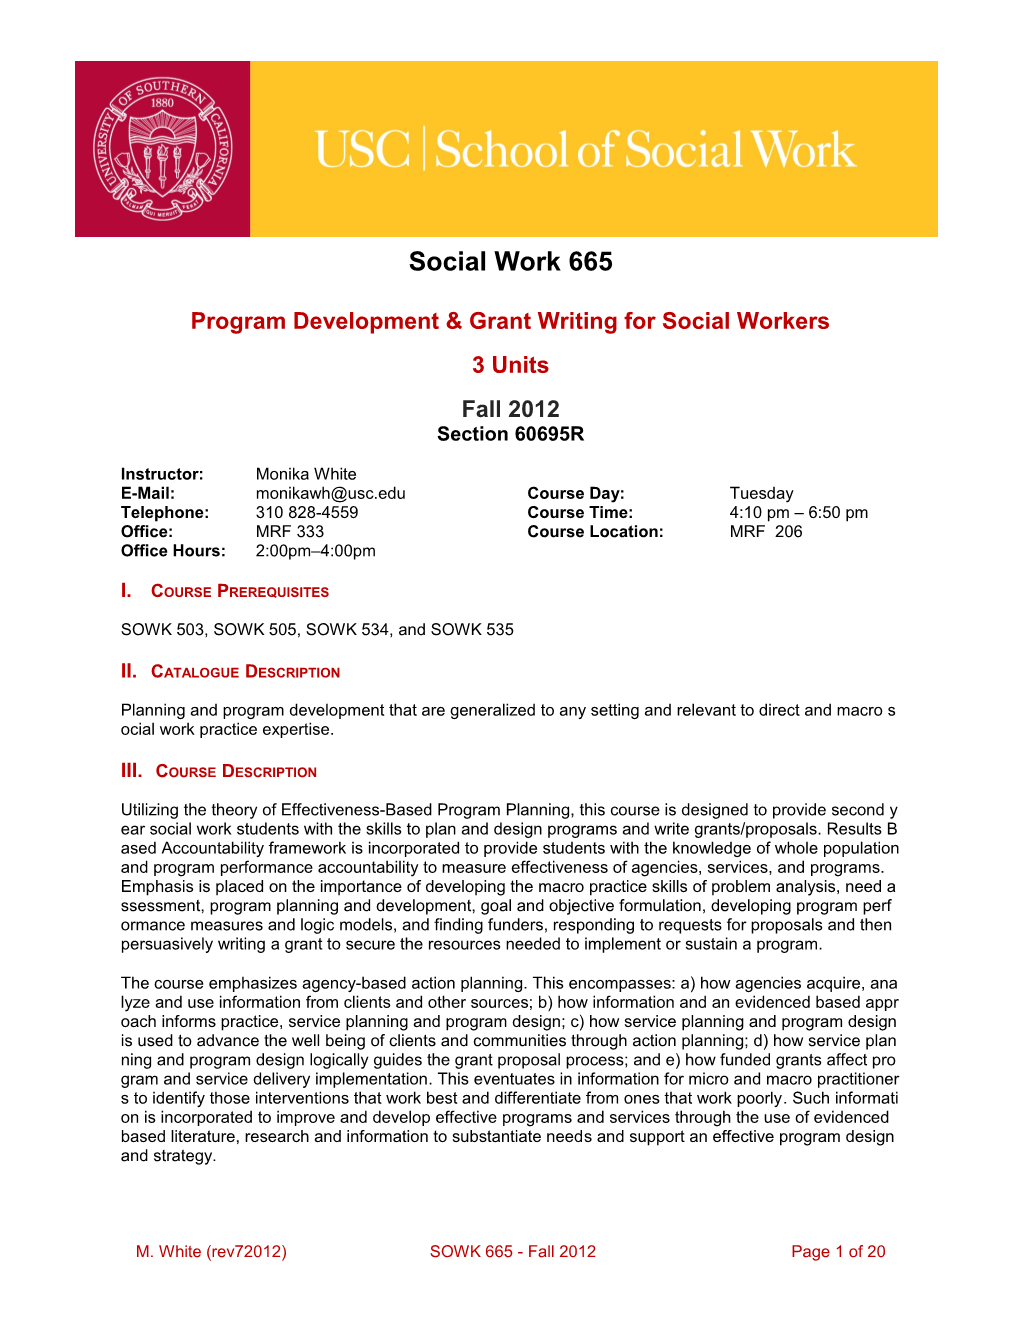 School of Social Work Syllabus Template Guide s20